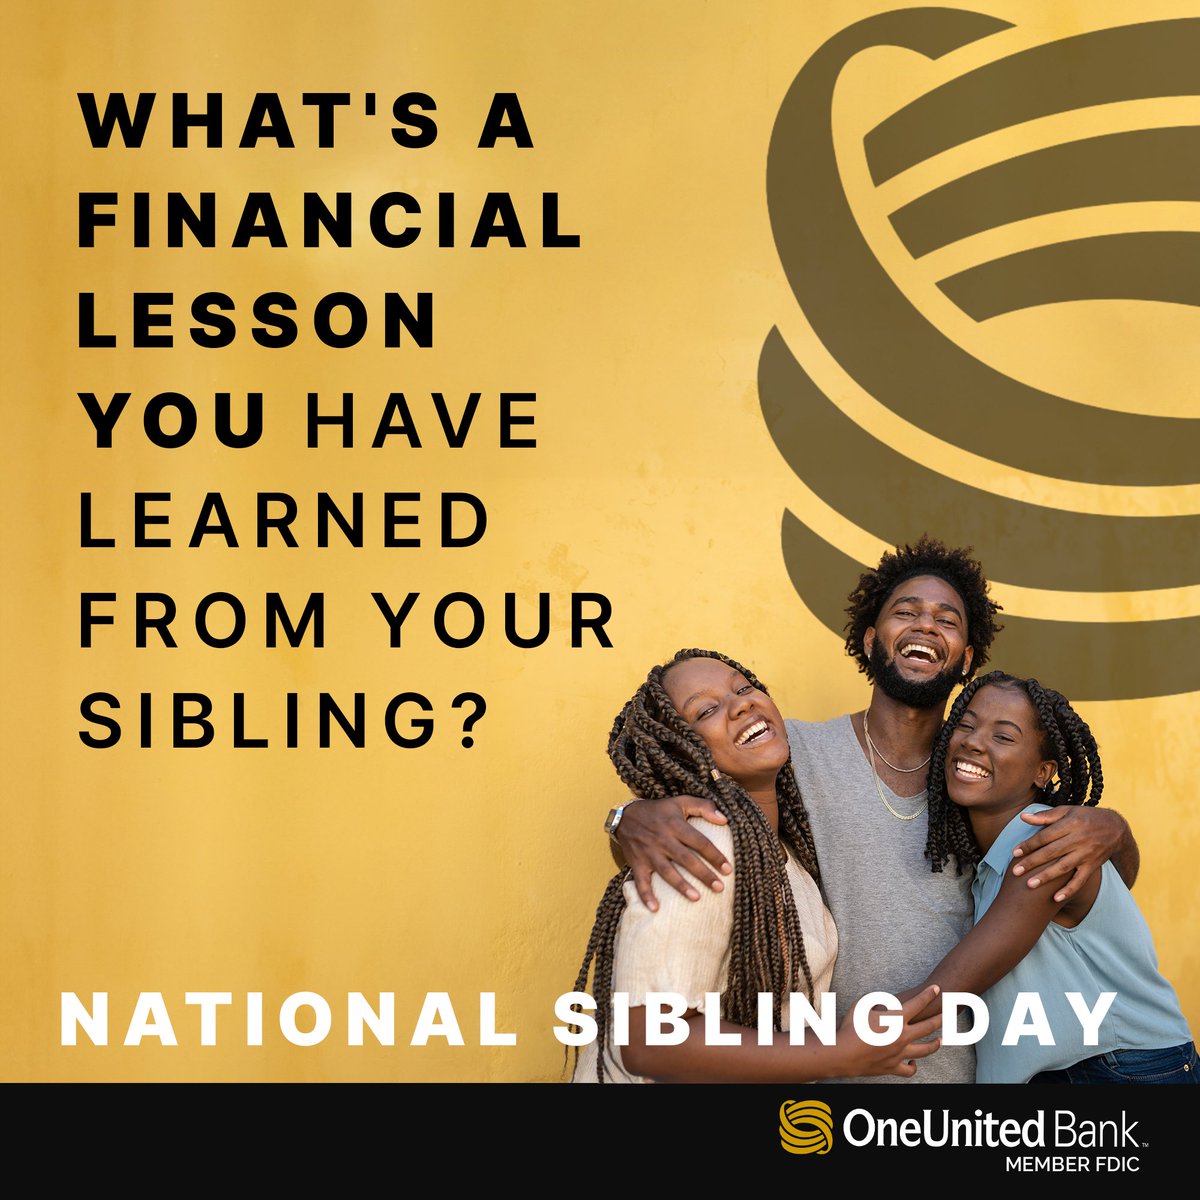 Happy National Siblings Day! 🫶🏾🎉 Share a financial lesson you've learned from your sibling!👇🏾 #SiblingDay #FinancialAdvice